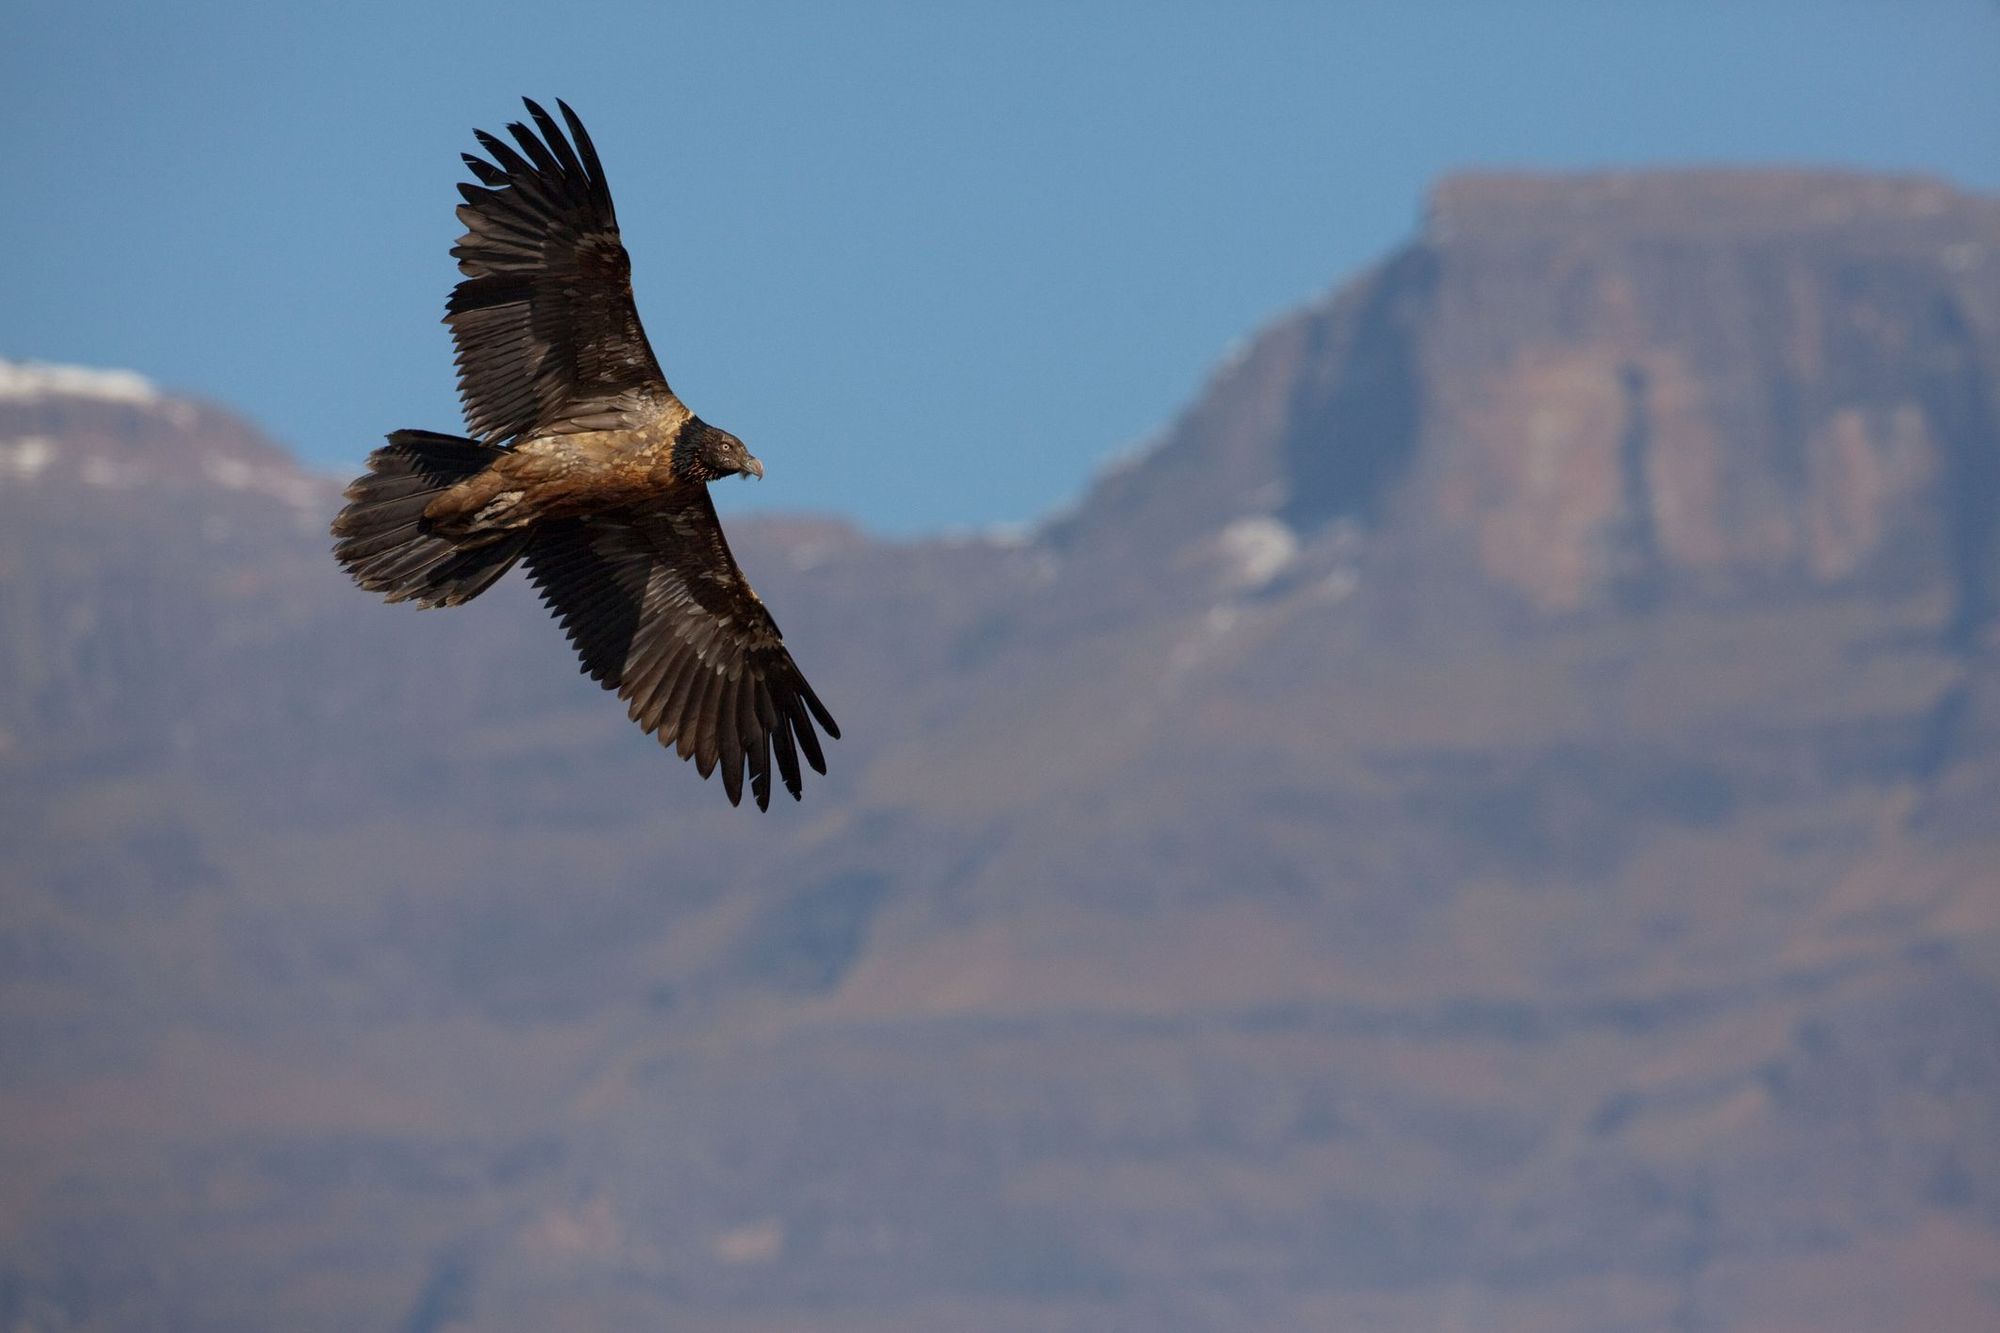 A bearded vulture spotted at the Giant's Castle hide in the Drakensberg Mountains. Photo: Getty.